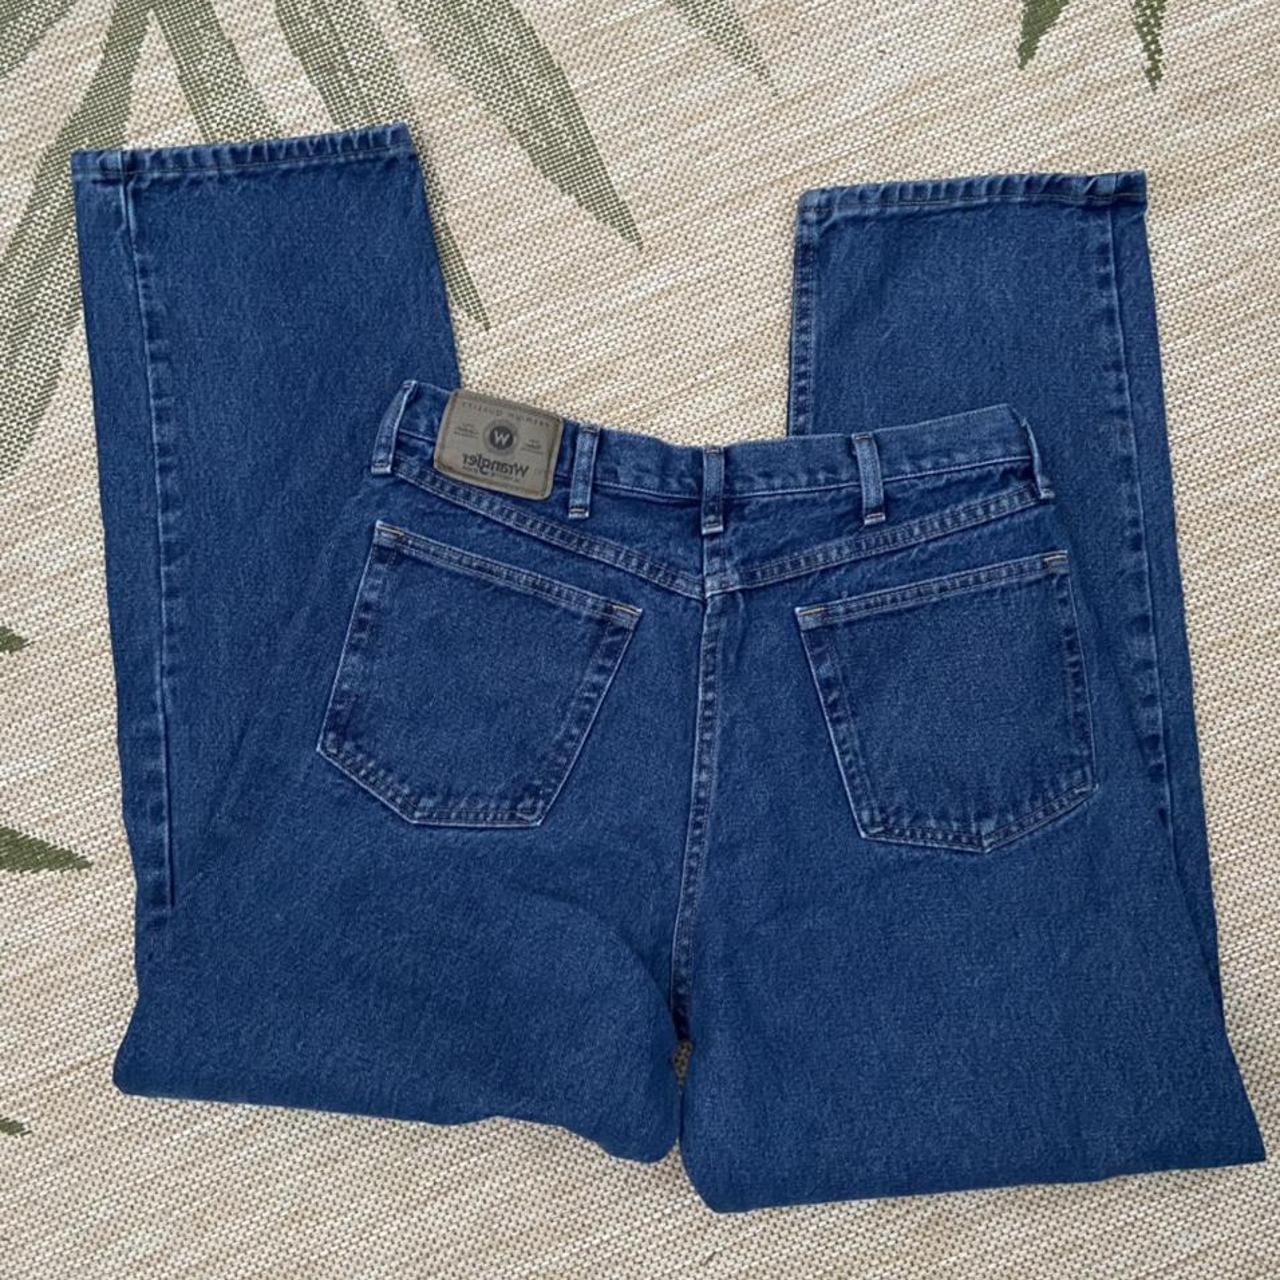 Product Image 2 - Wrangler relaxed fit Jeans. 34/32